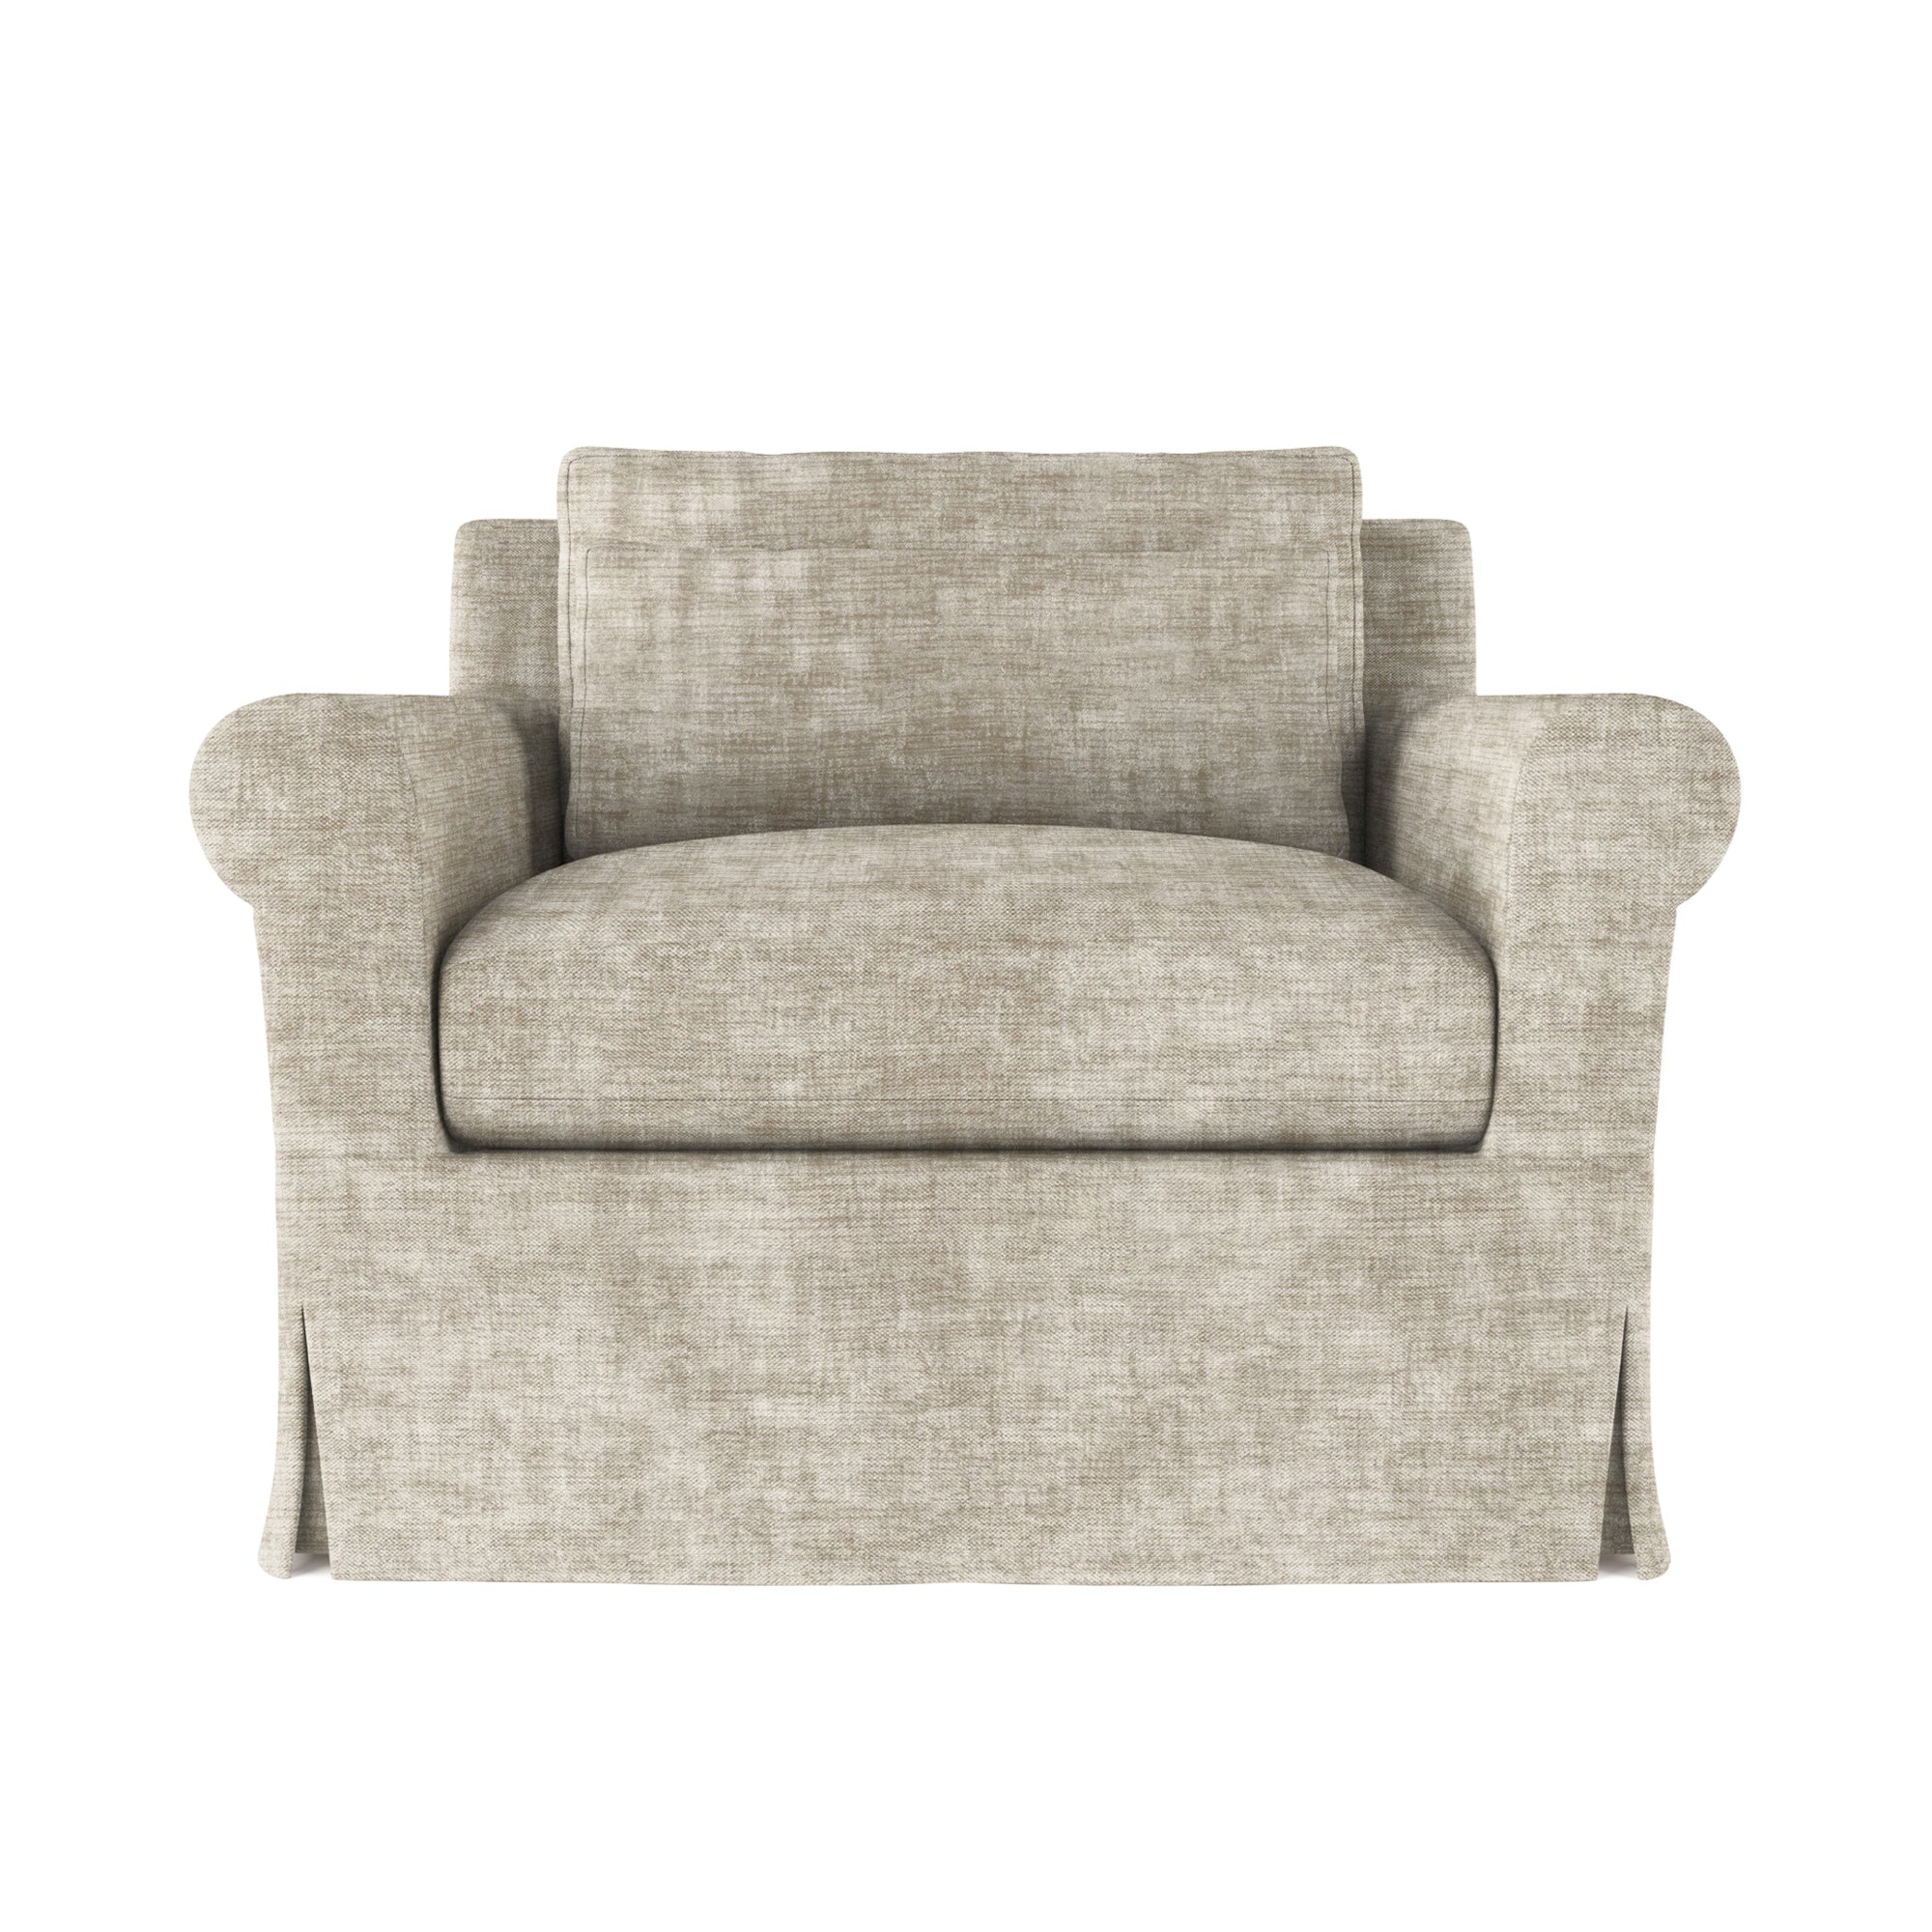 Ludlow Chair - Oyster Crushed Velvet